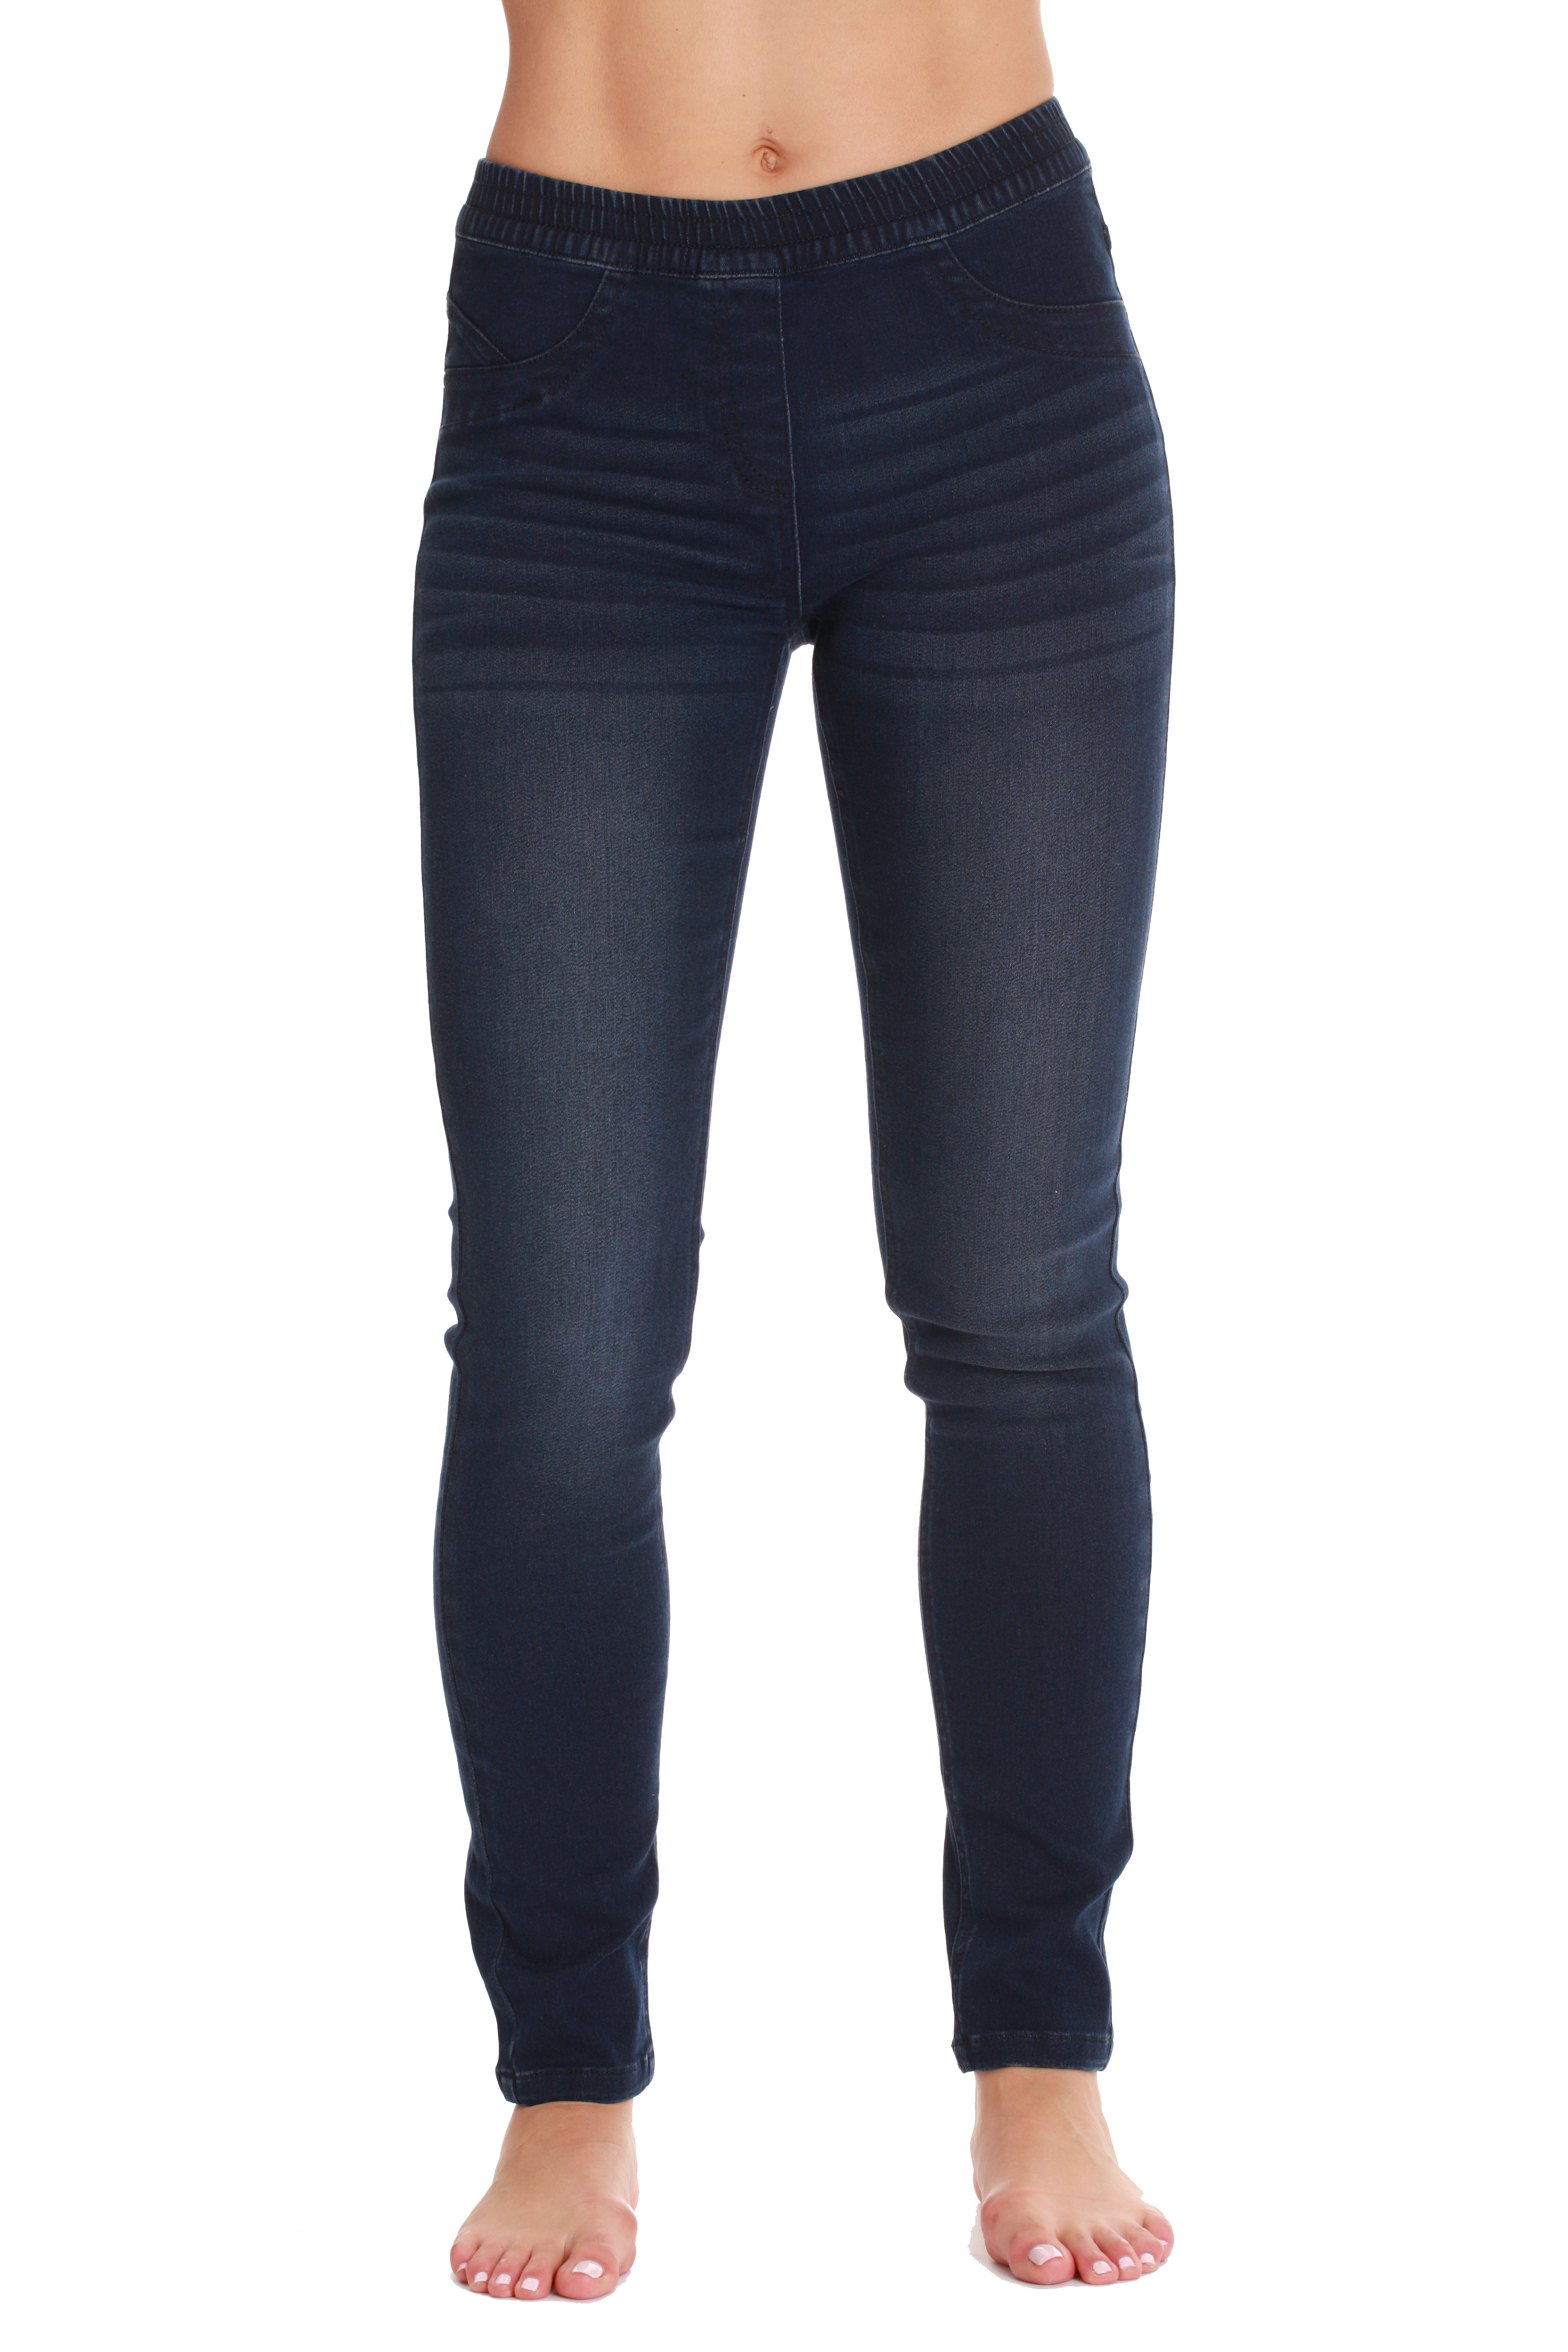 Just Love Denim Jeggings for Women with Pockets Comfortable Stretch ...